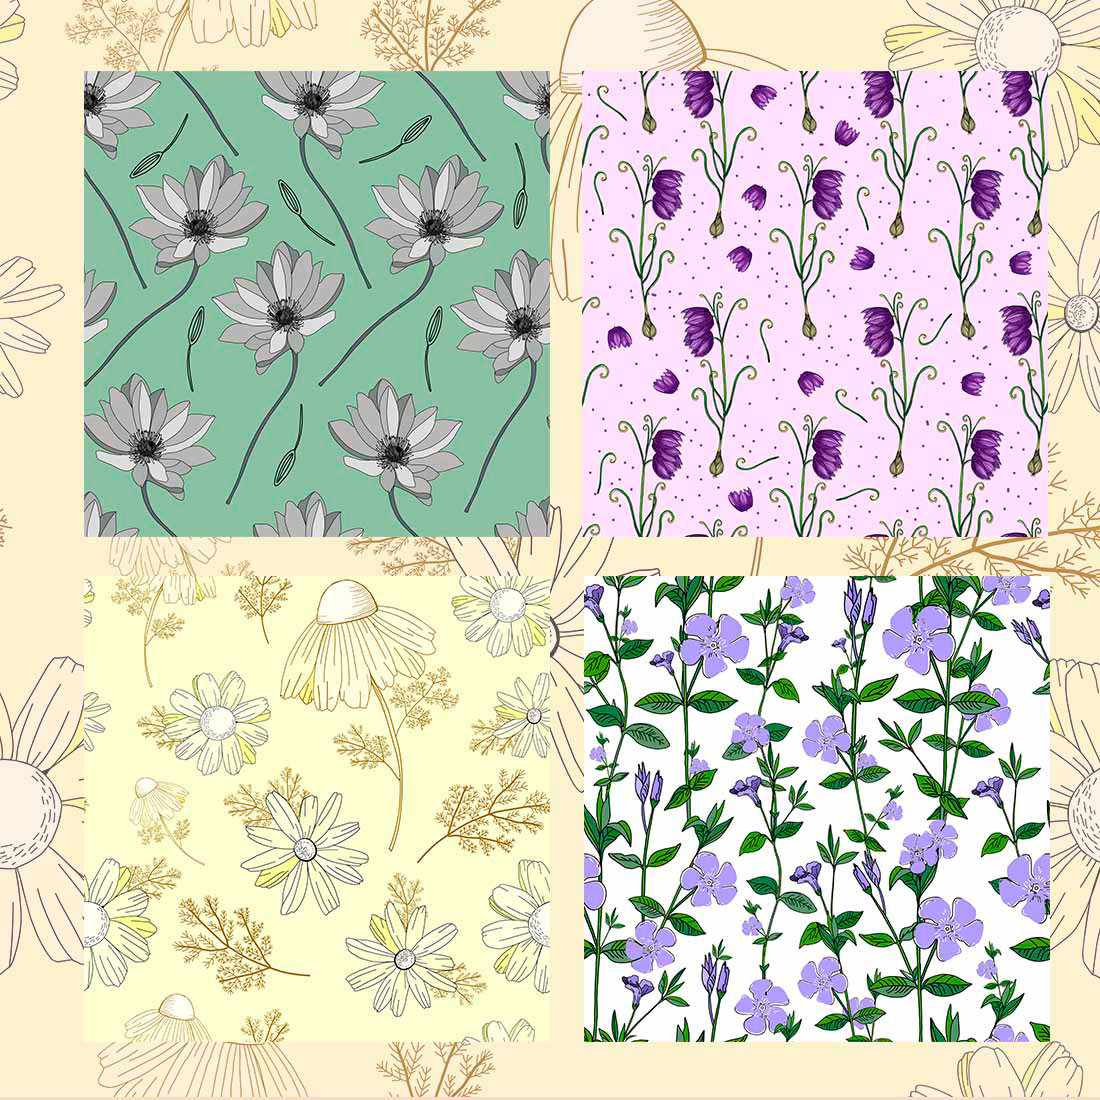 Collection of adorable images of patterns with wildflowers.